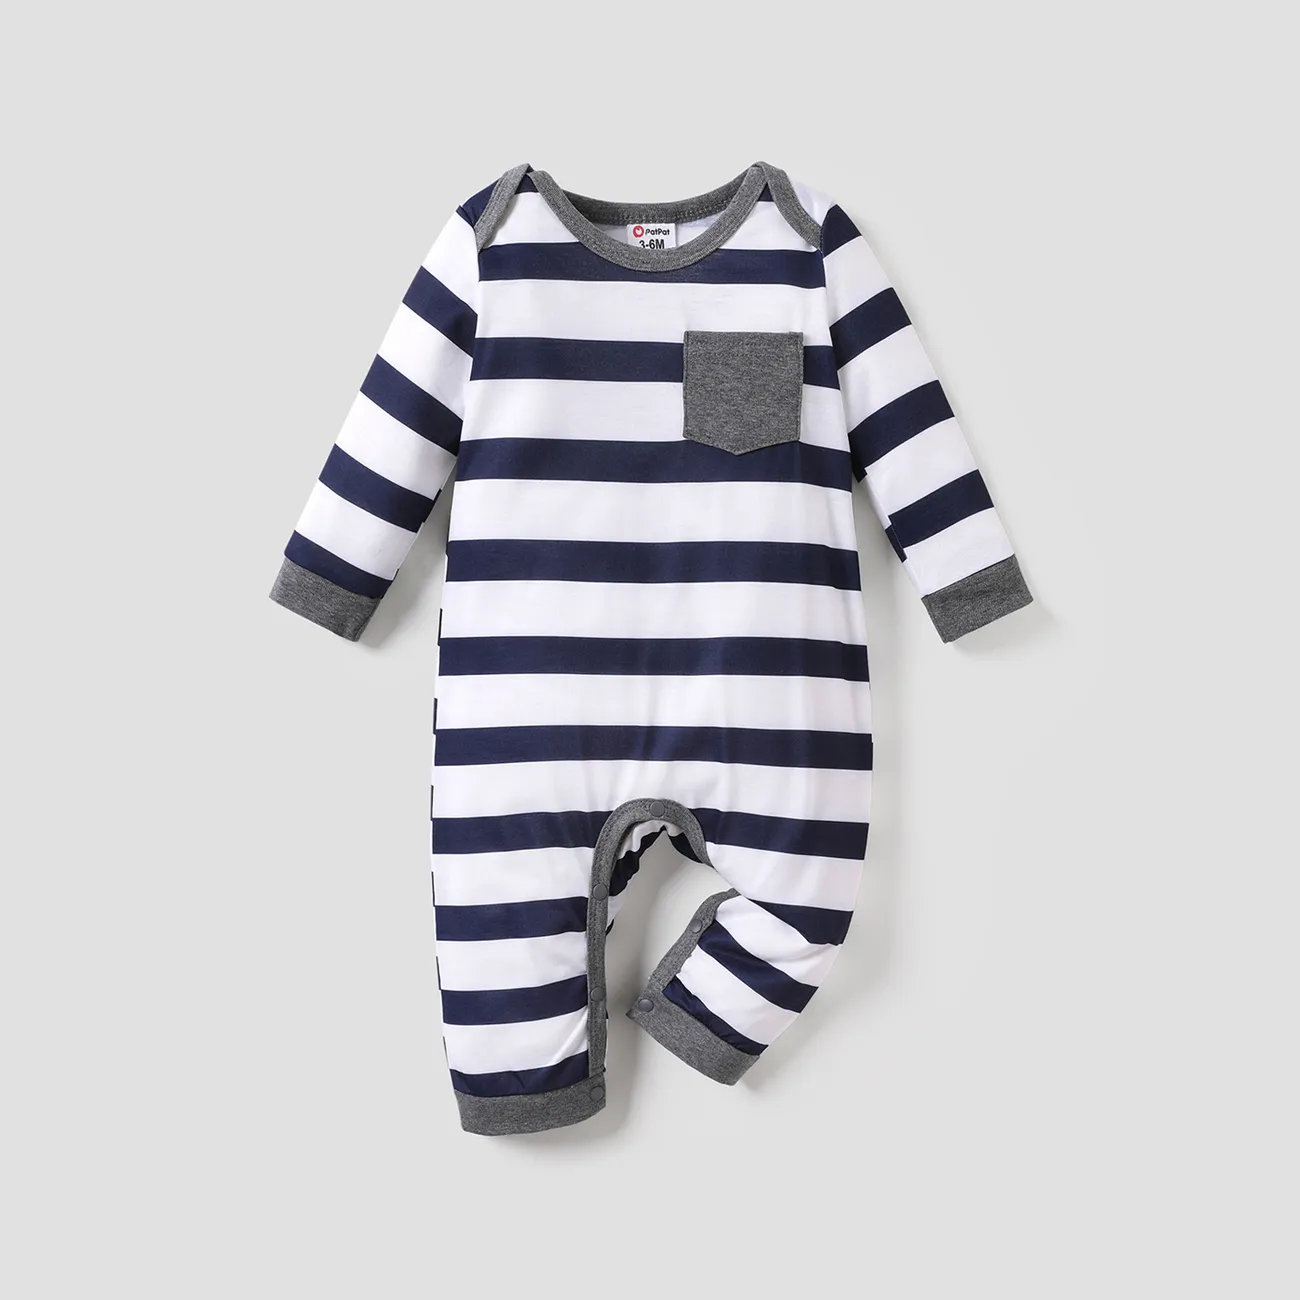 Baby Boy All Over Striped/Star Print Long-sleeve Jumpsuit Dark Blue/white big image 1